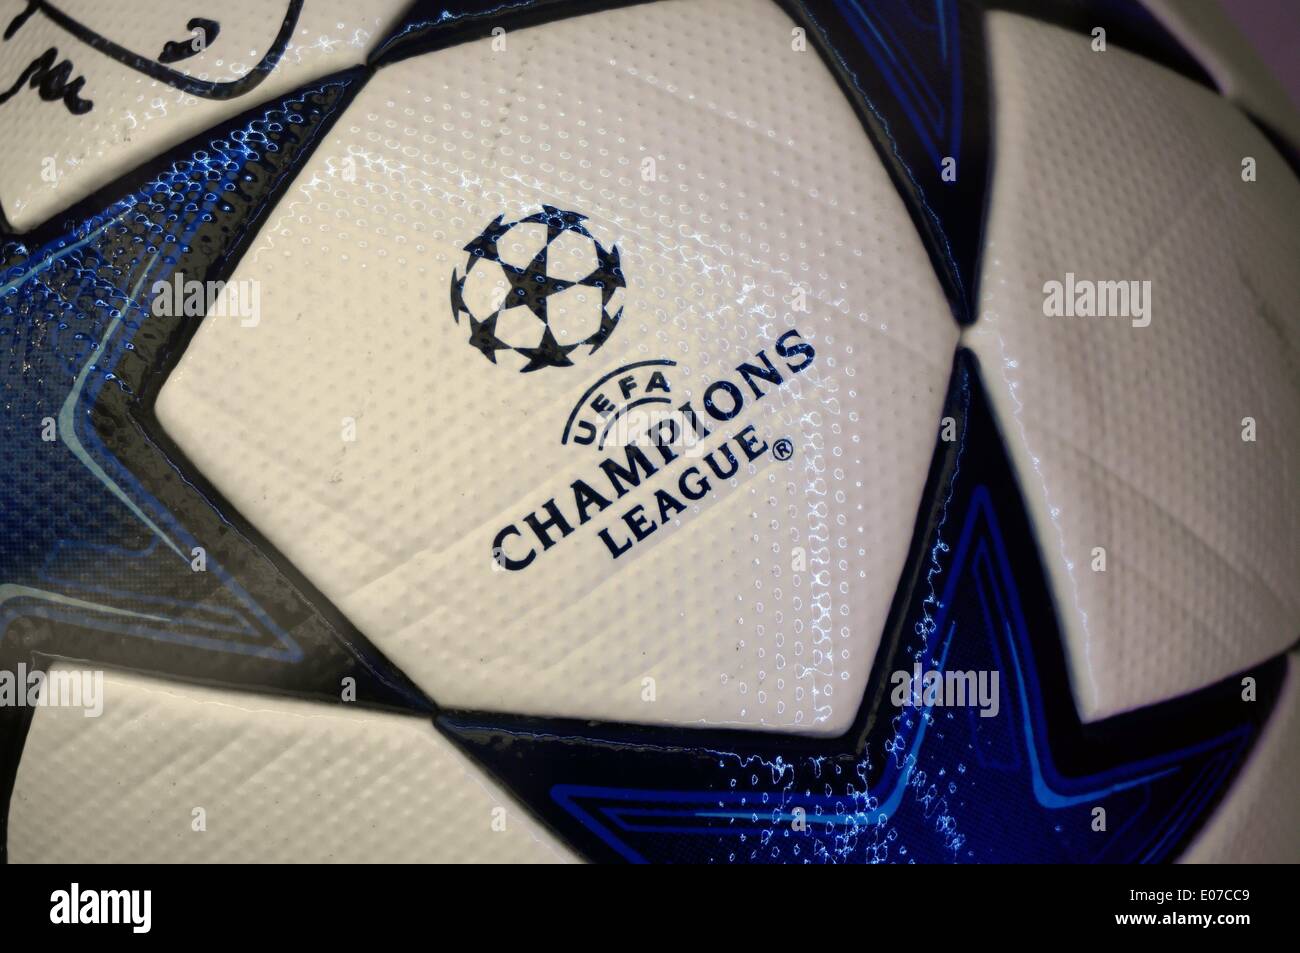 The soccer ball of the Champions League quarter final second leg match on  13 April 2011 trophy is on display during the UEFA Champions League Trophy  Tour at Dorothea-Schlegel-Platz in Berlin, Germany,